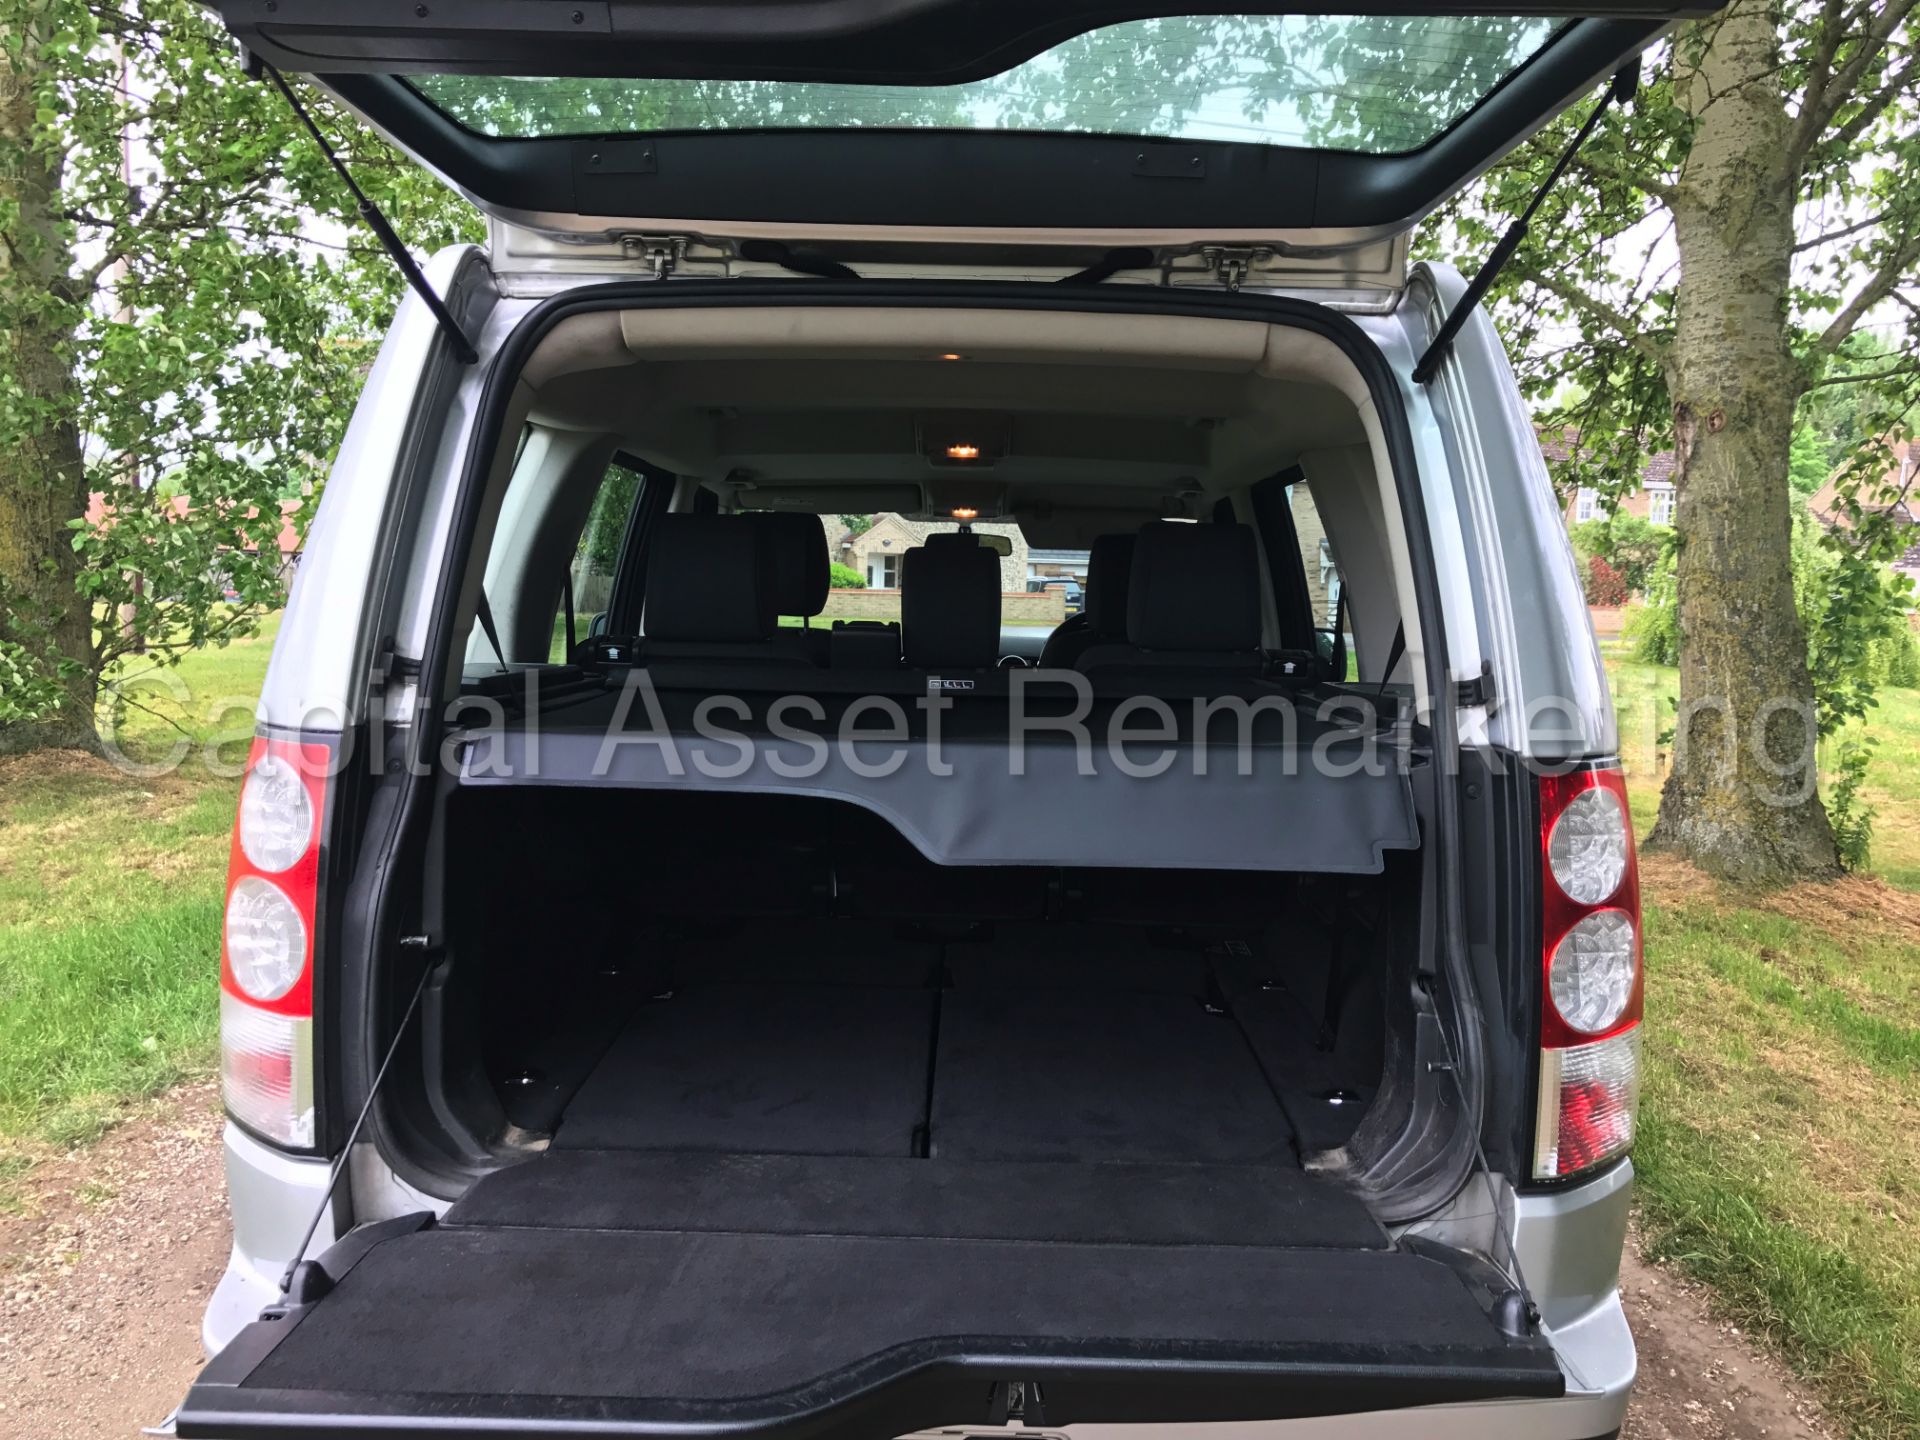 (On sale) LAND ROVER DISCOVERY 4 (2014 MODEL) '3.0 SDV6 -AUTO- 255 BHP - 7 SEATER'(1 OWNER FROM NEW) - Image 27 of 42